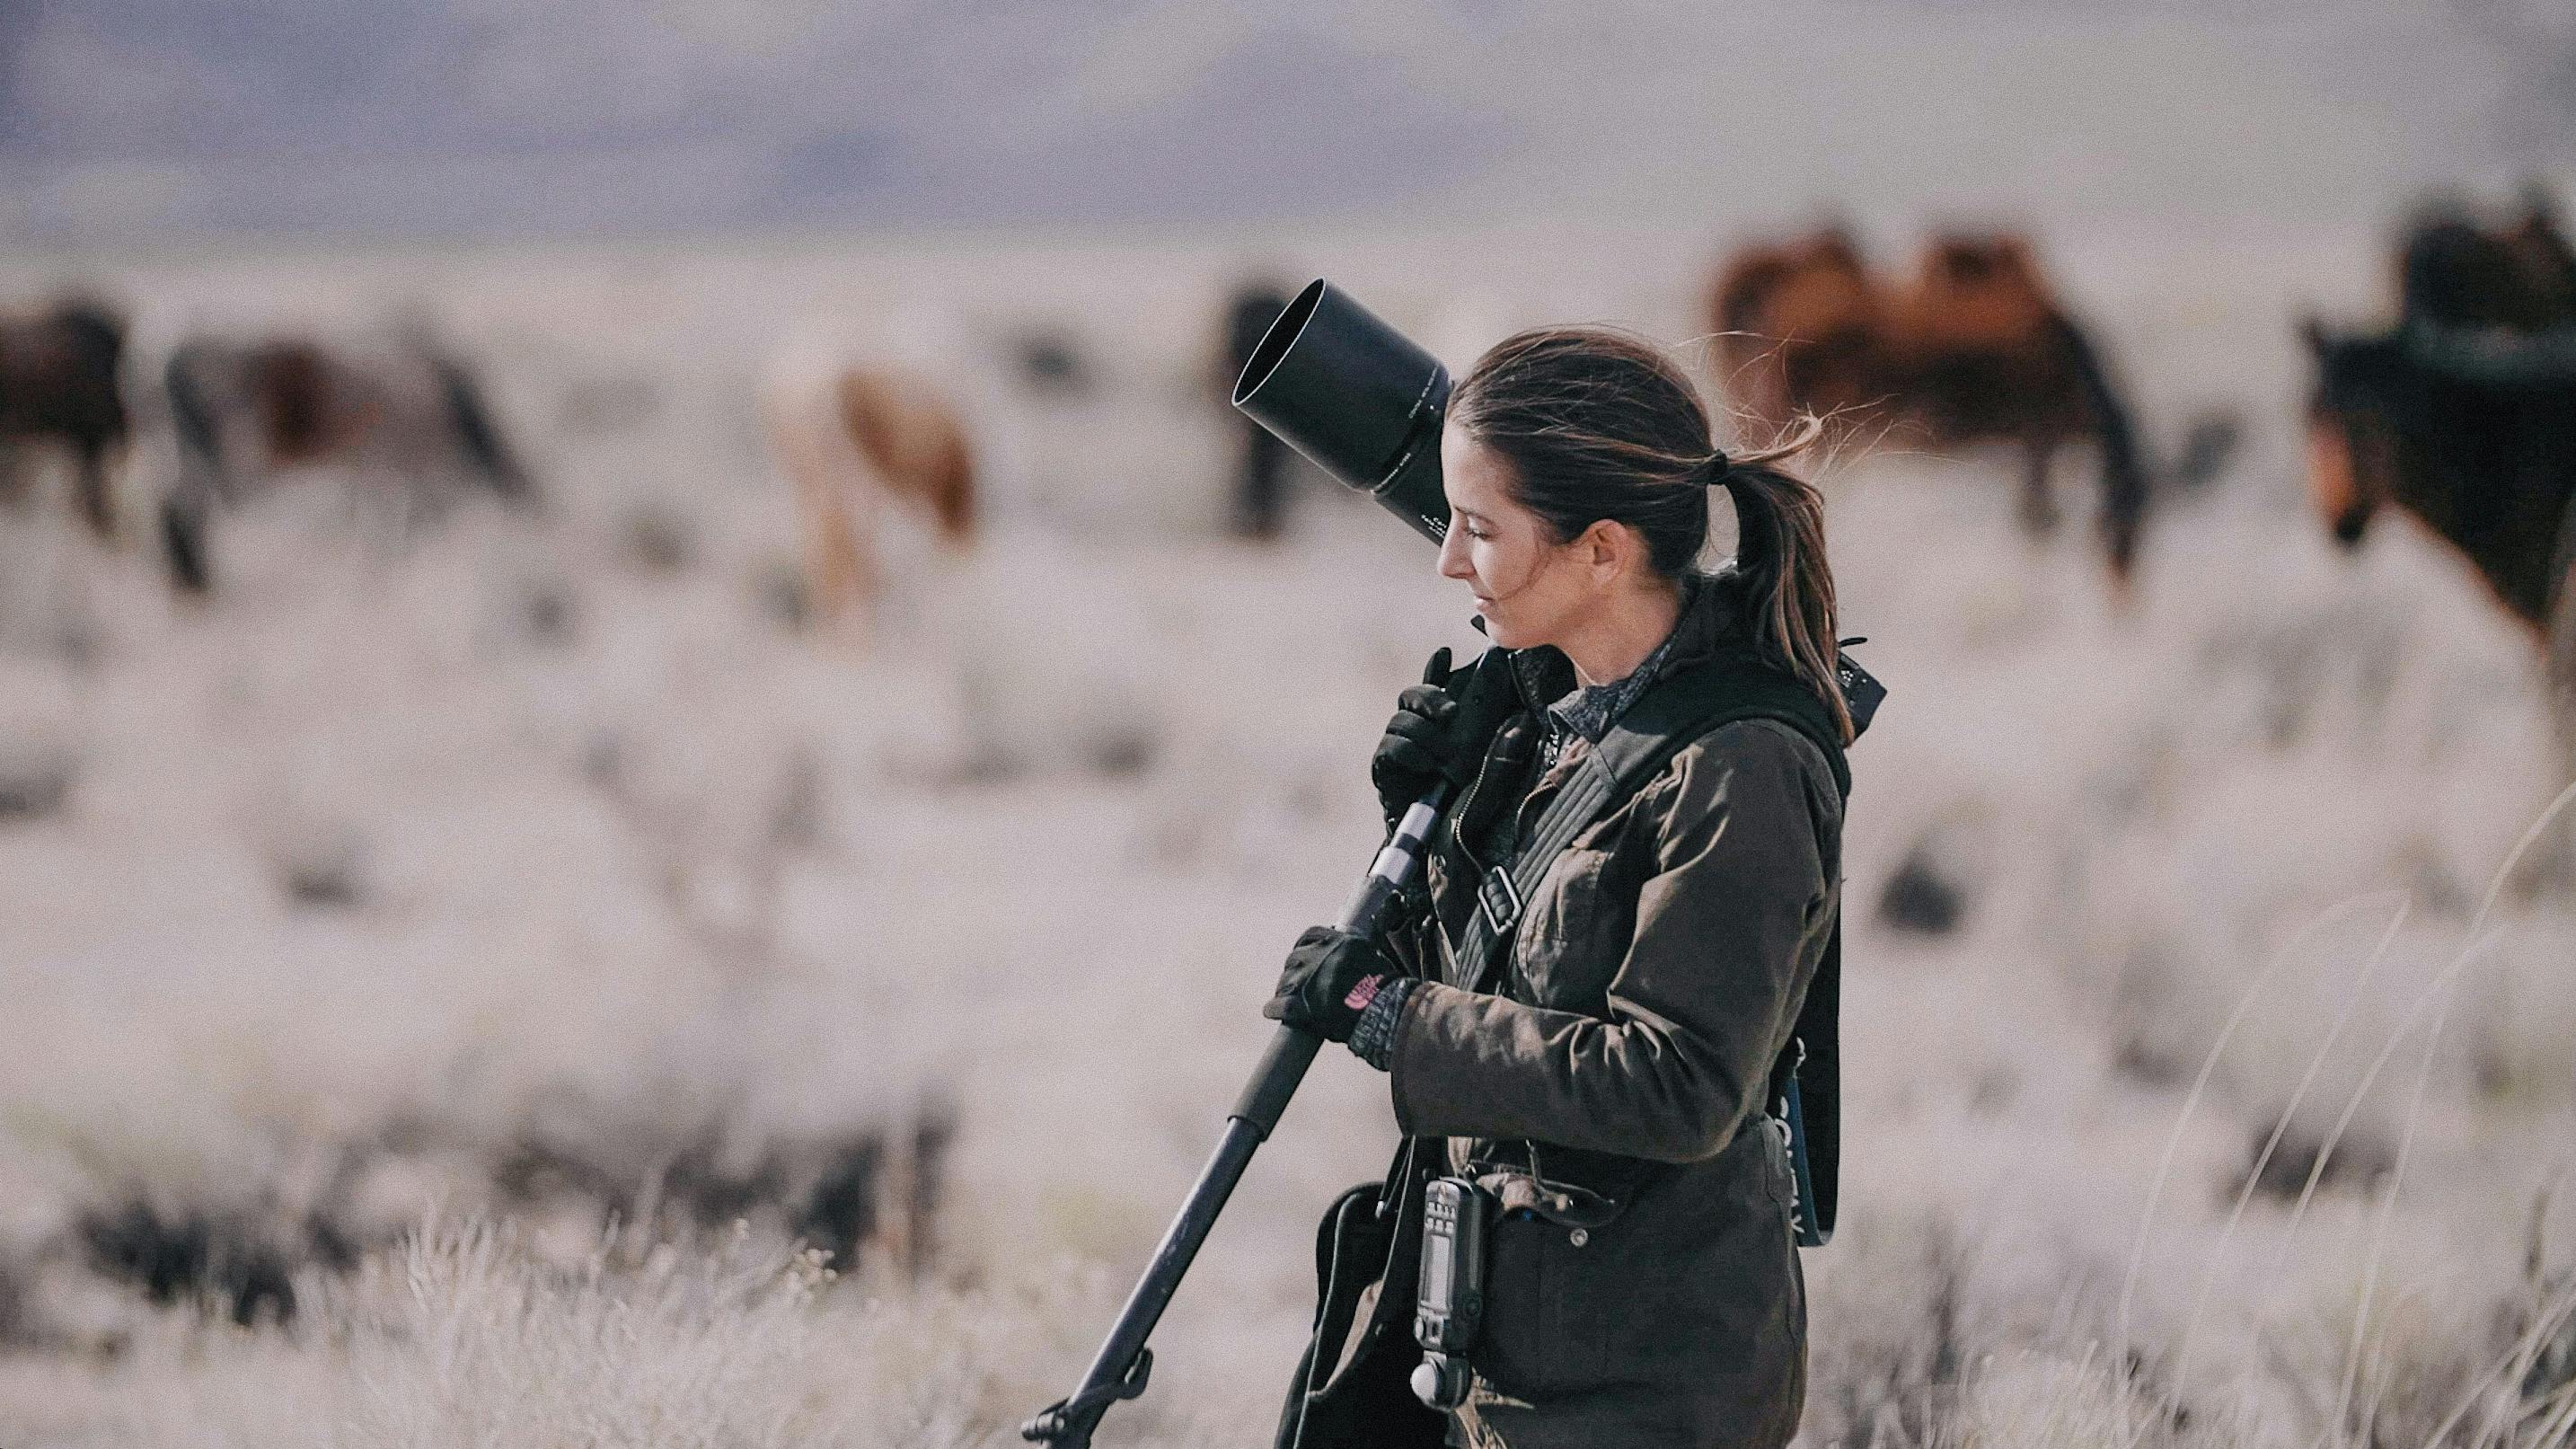 Professional wedding photographer KT Merry photographing her latest passion project; wild mustangs in Northern Nevada